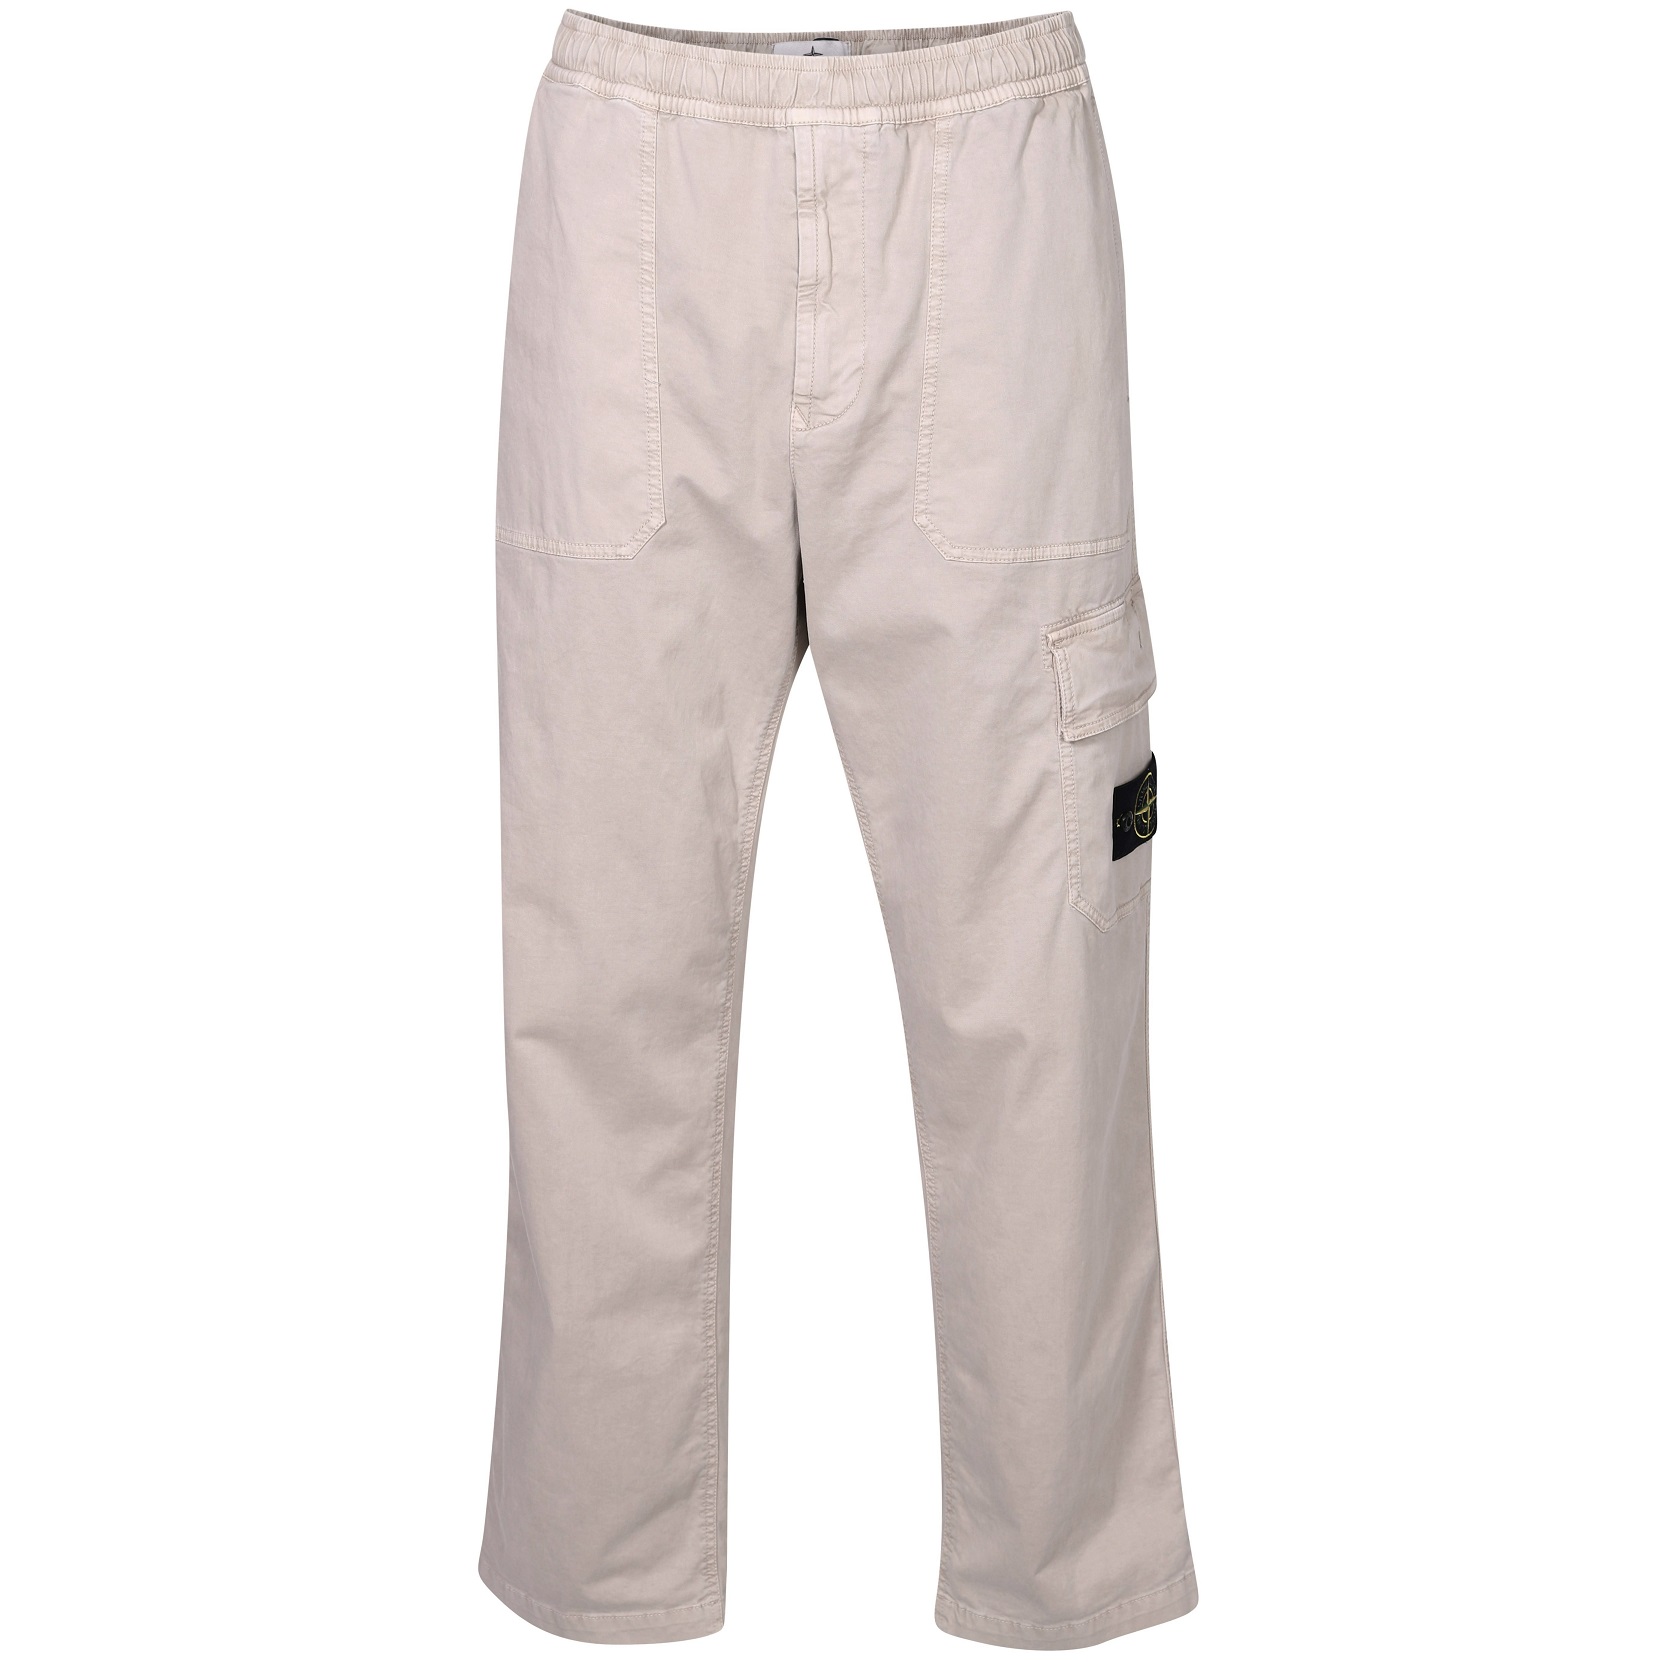 STONE ISLAND Loose Cargo Pant in Washed Dove Grey 29